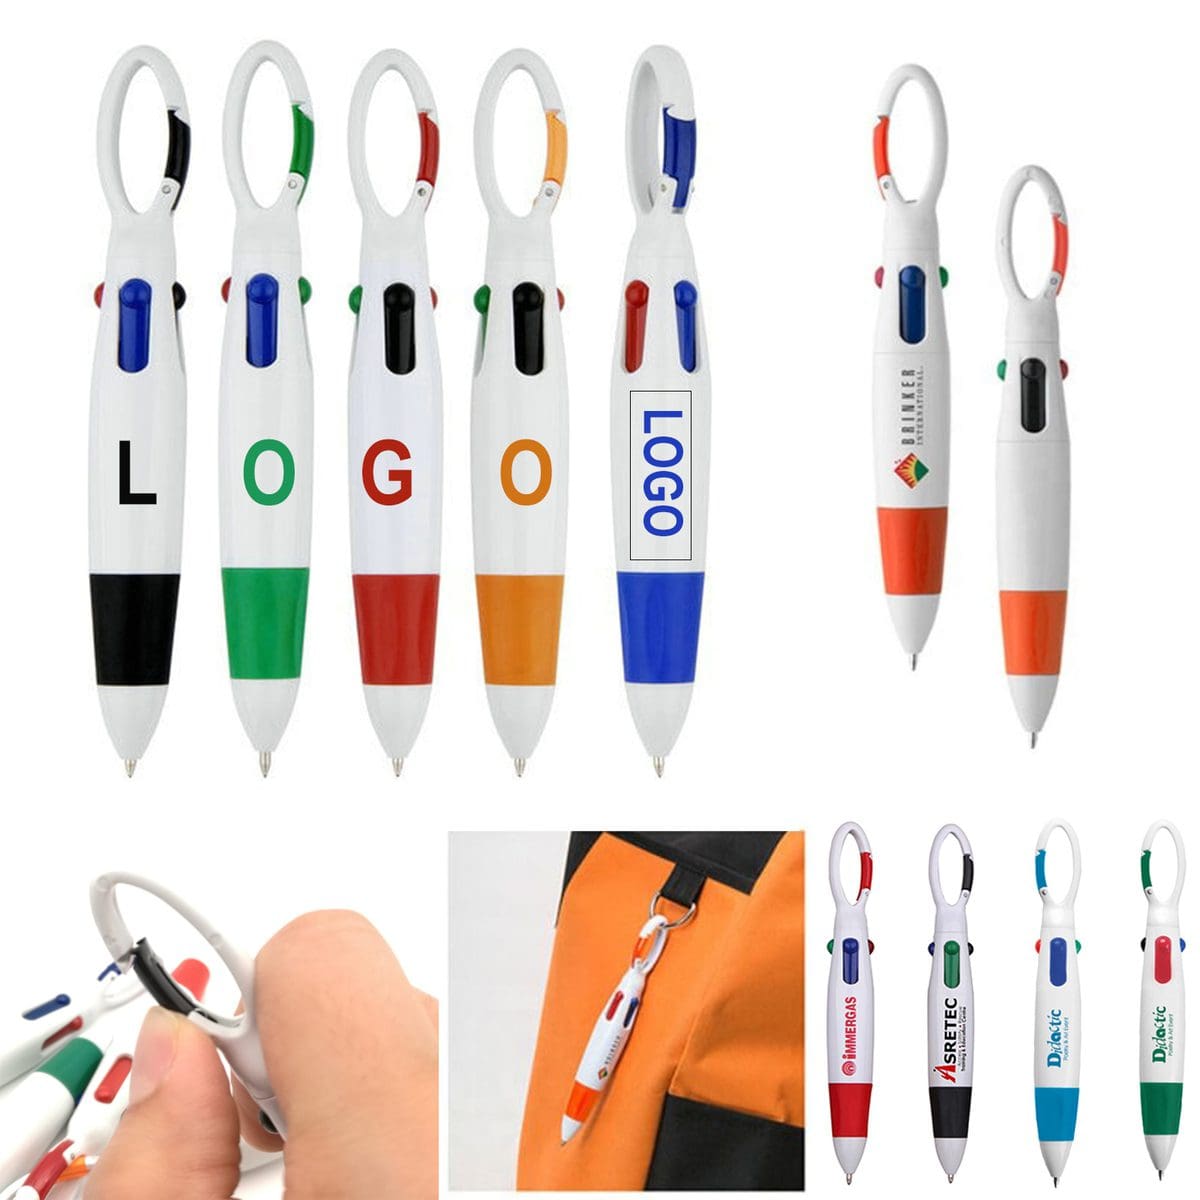 Fusion Marketing Our Top 20 Promotional Pens with Logo Options the Markets Where They Shine 4 in 1 Retractable Shuttle Pens with Carabiner Copy